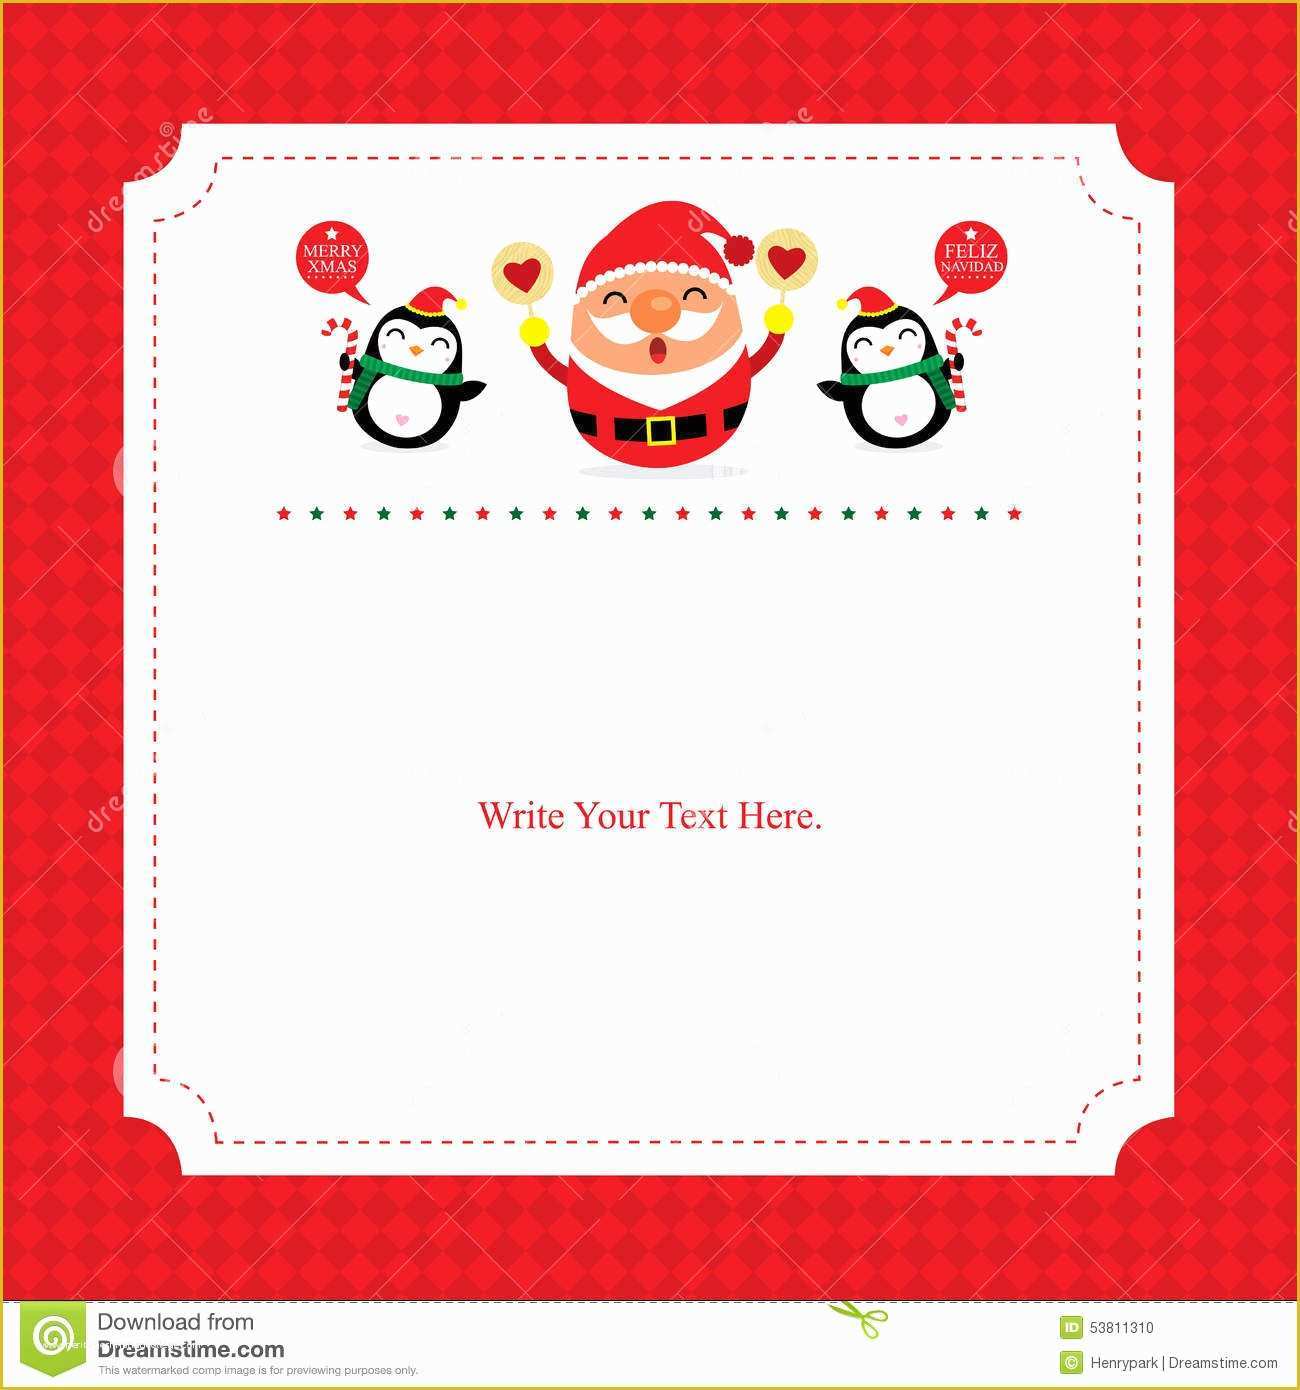 Free Christmas Photo Card Templates Online Of Christmas Card Template with Santa Claus Stock Vector